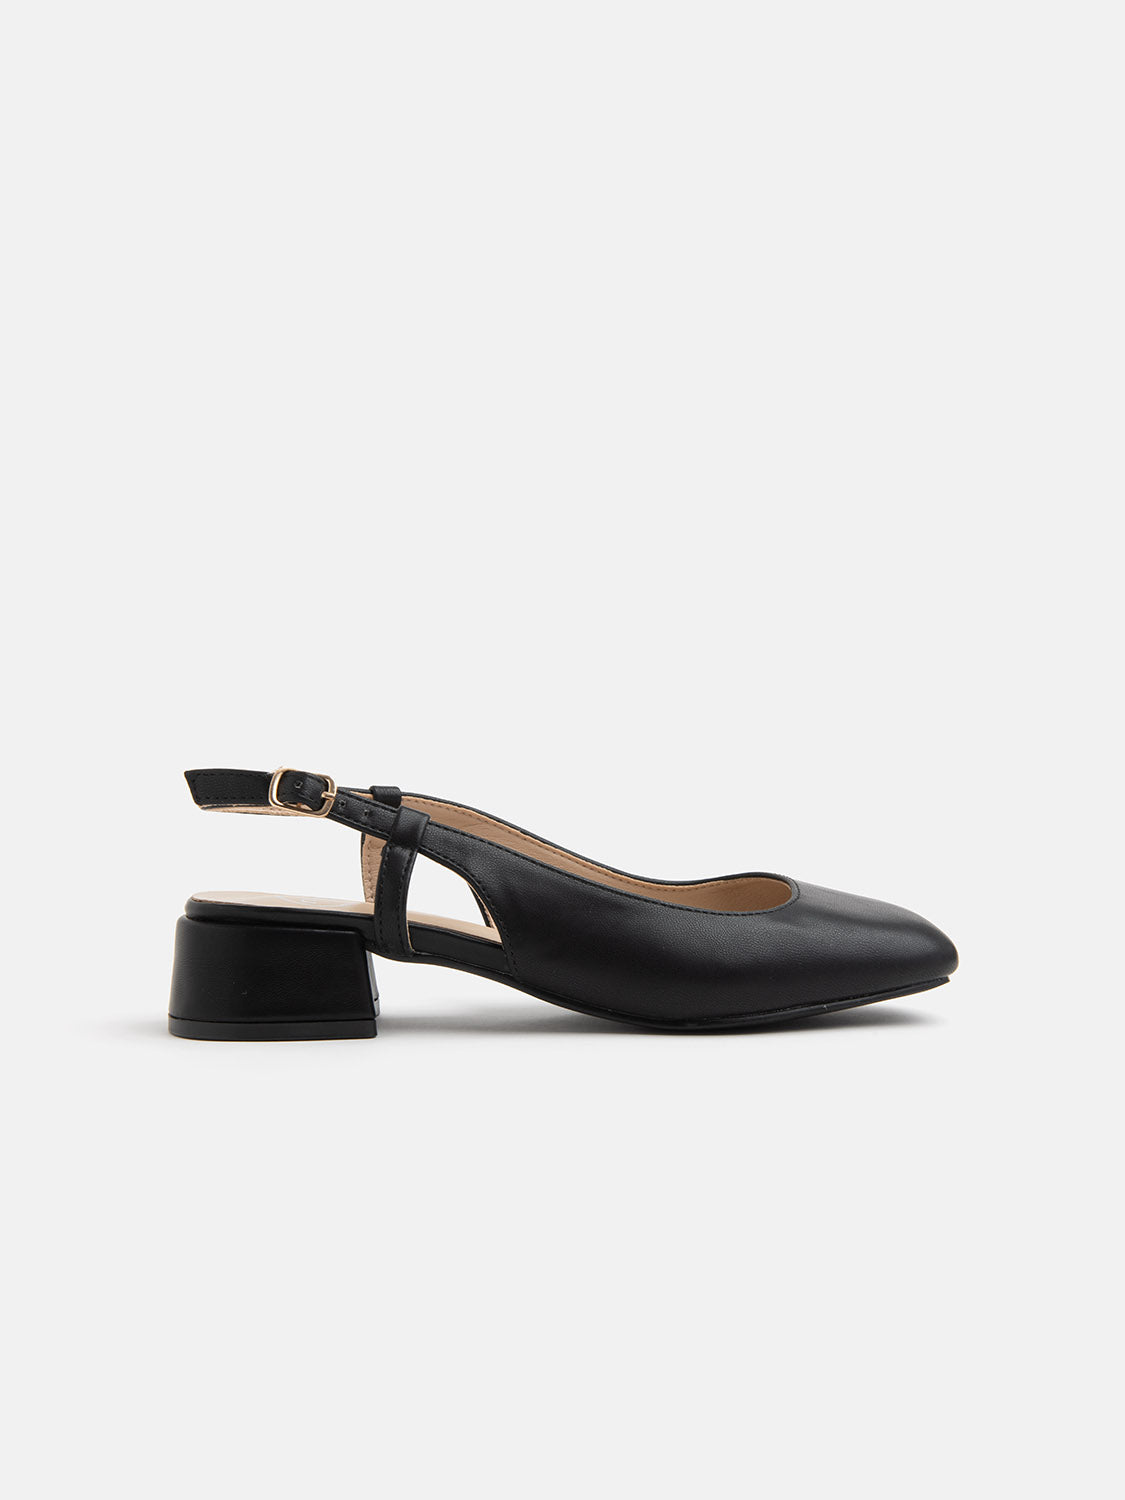 Slinbgback pump with rounded toe - BLACK